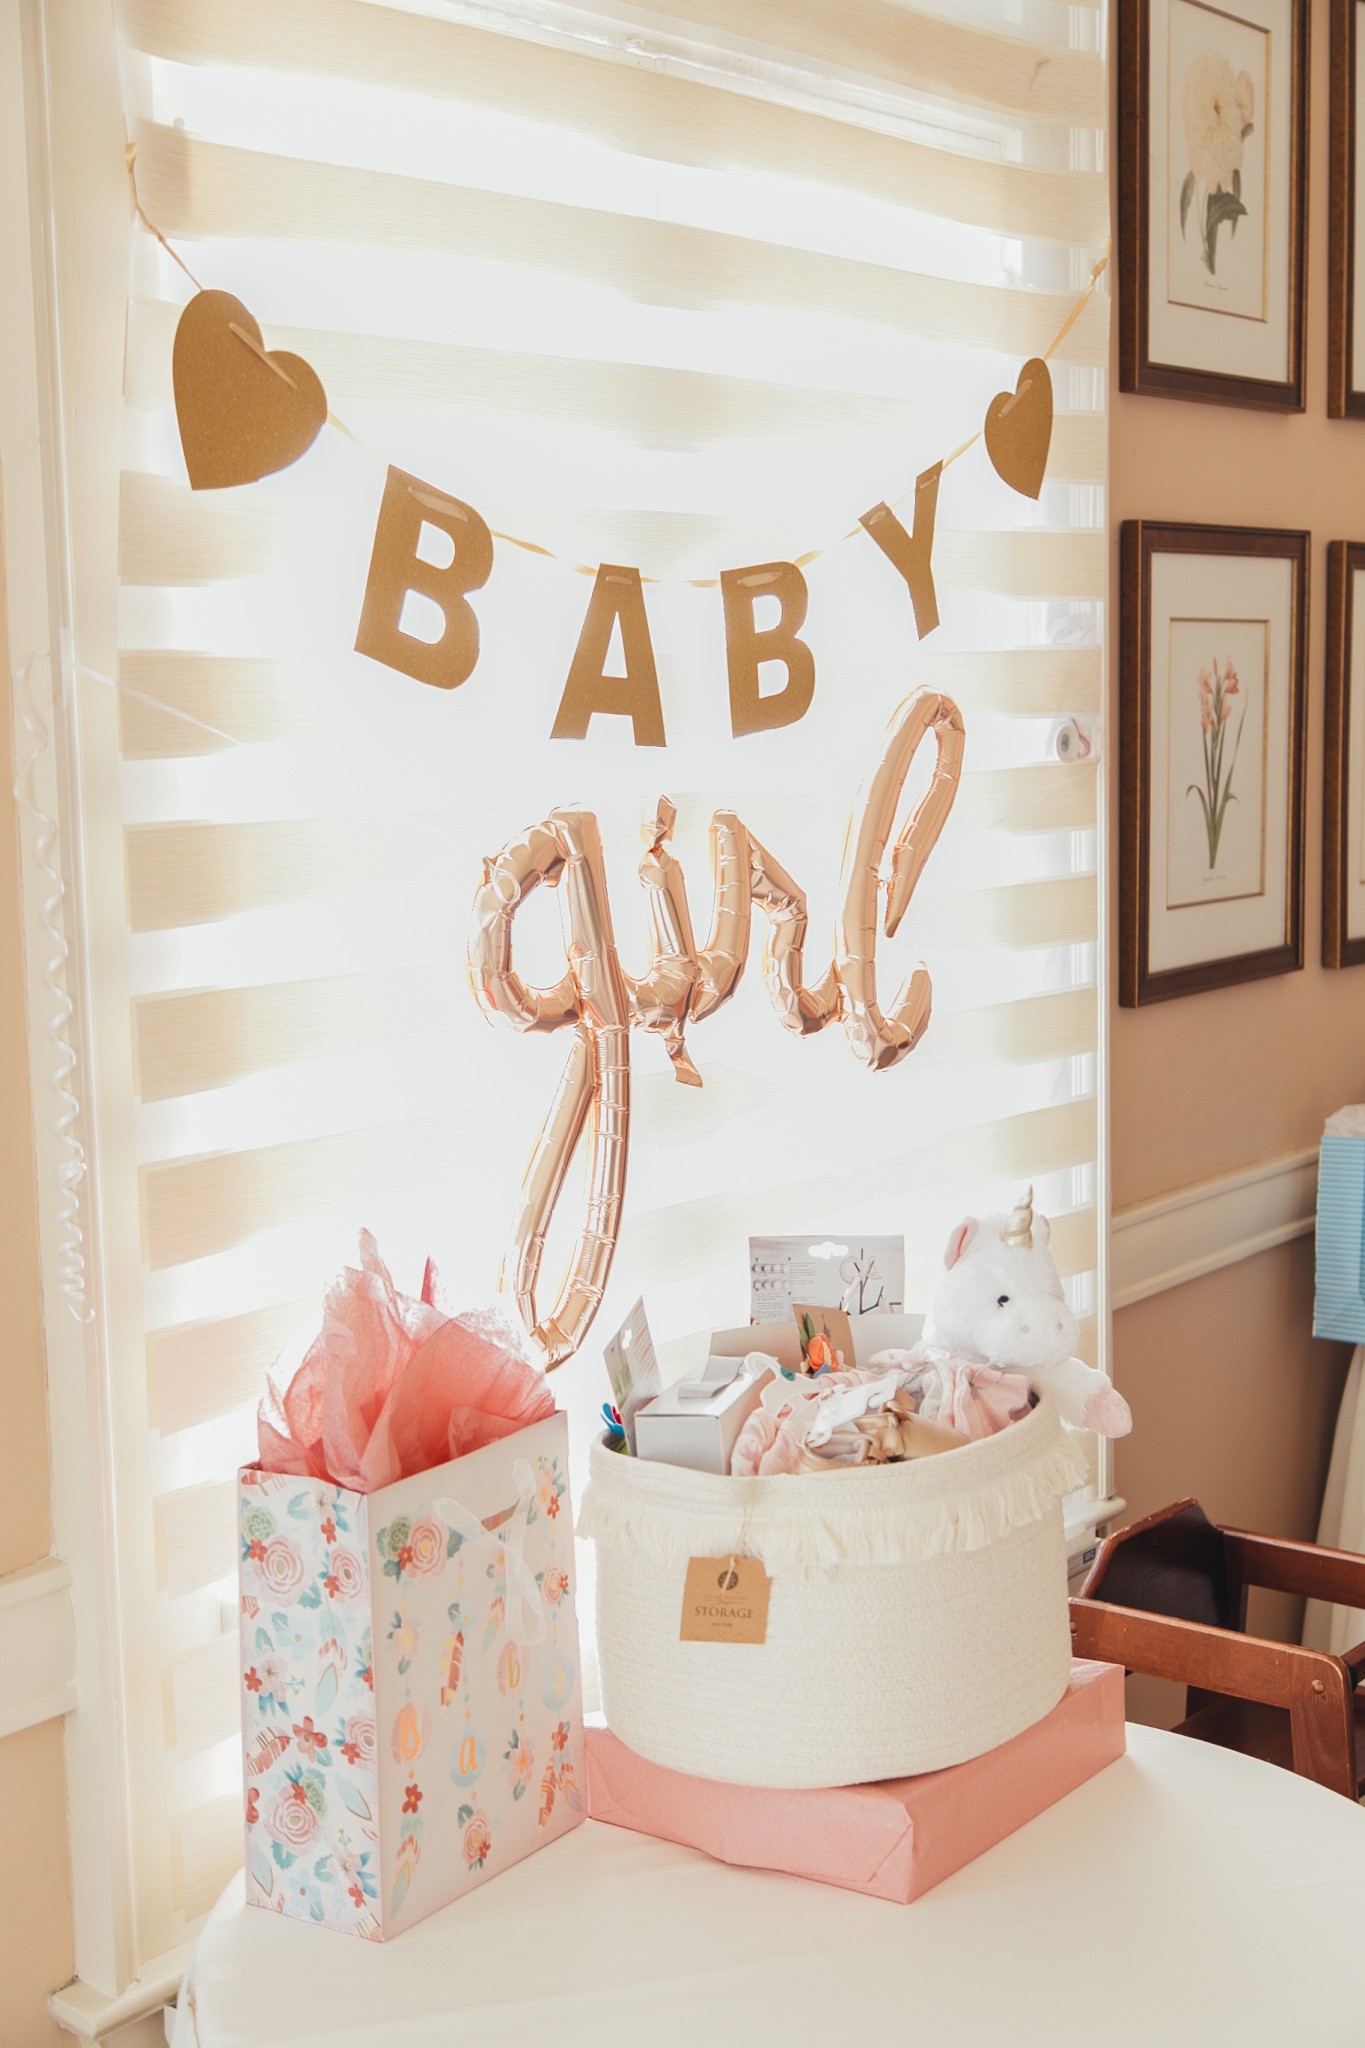 BABY SHOWER DAY! | Hayley Paige Blogs